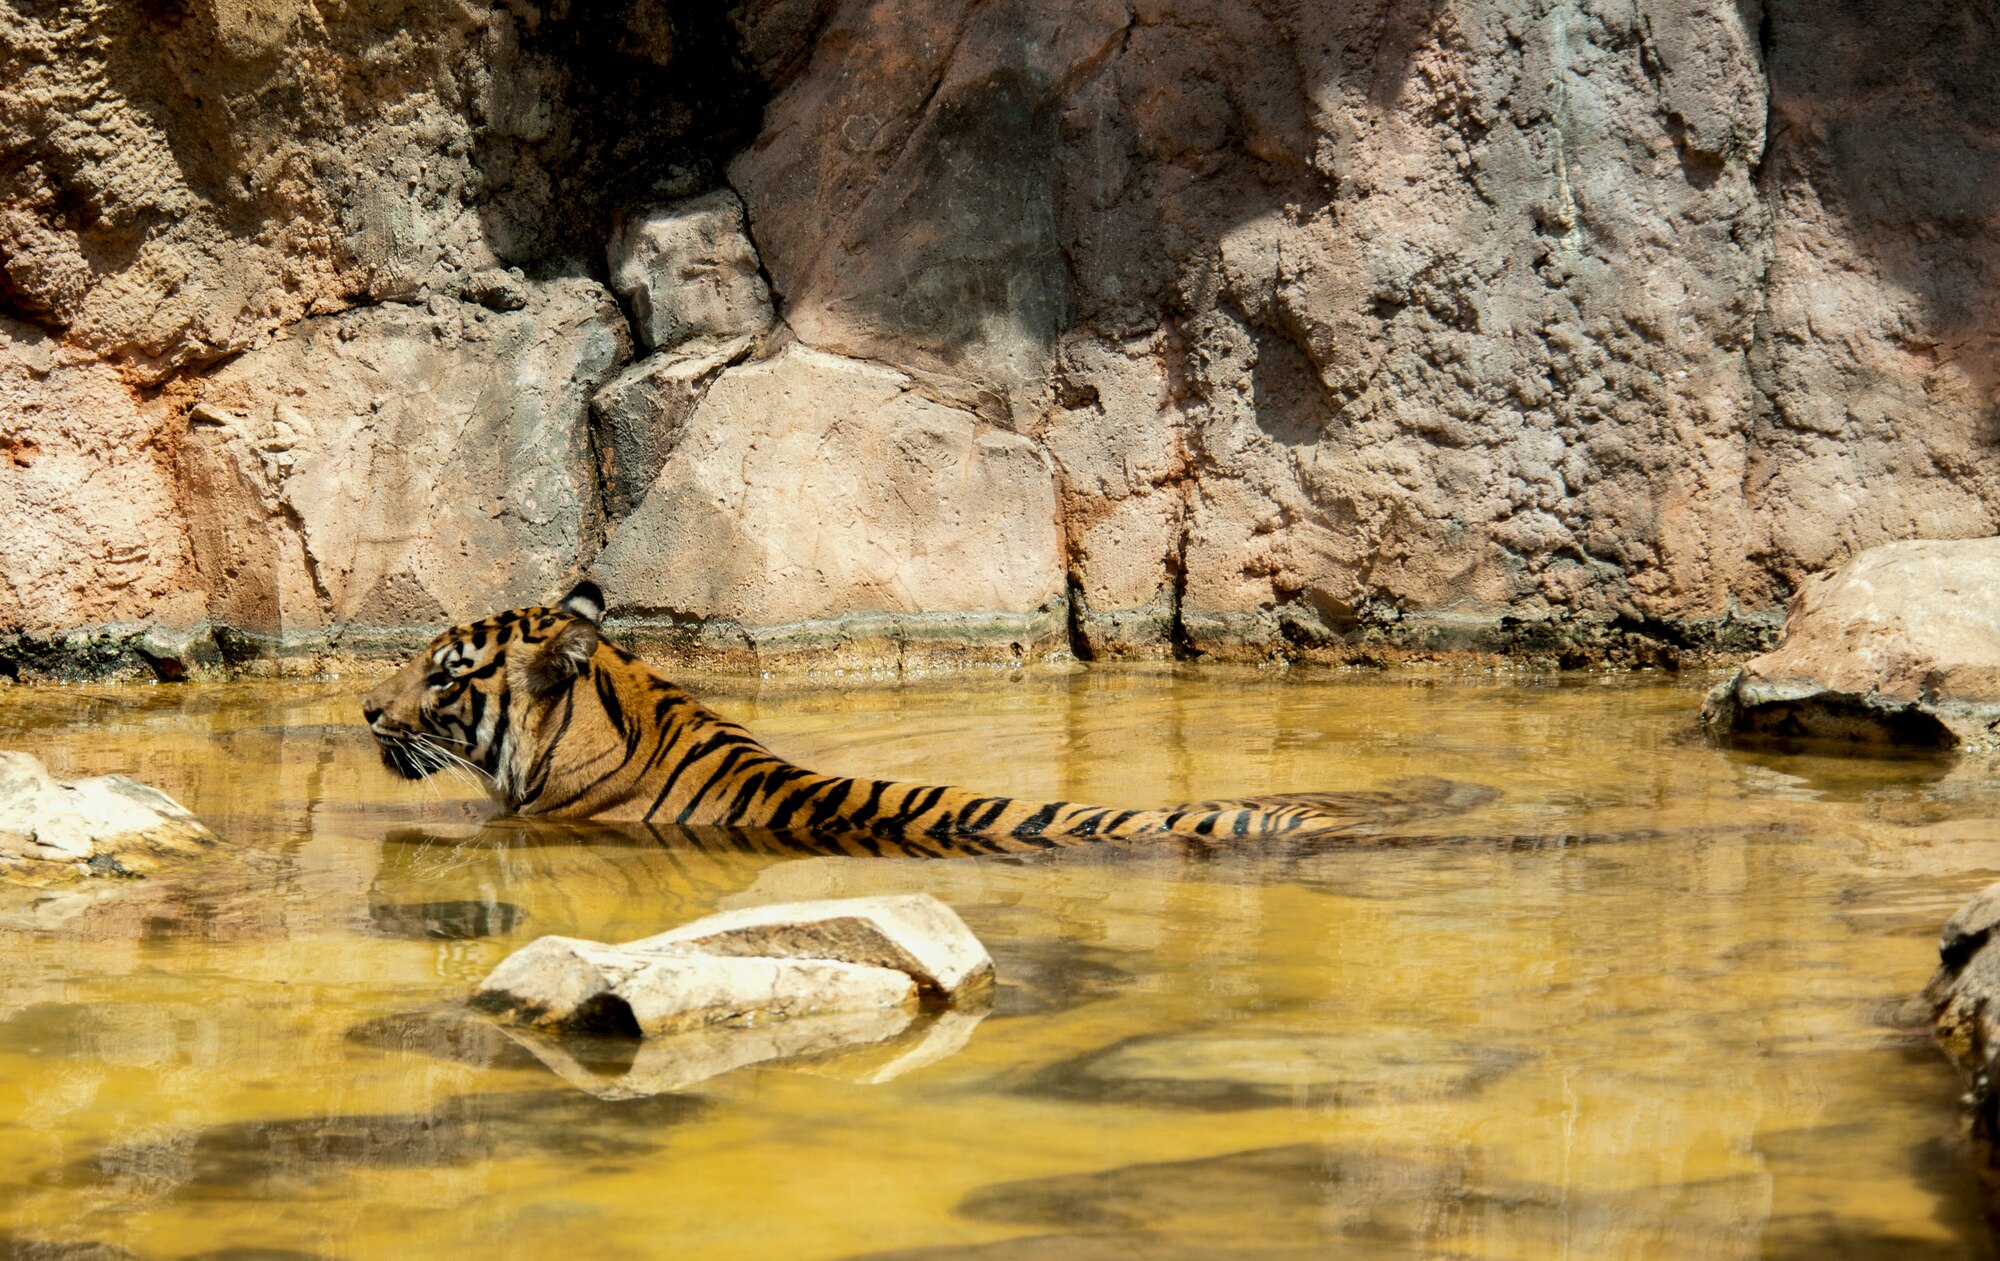 A tiger (Panthera tigris) cools off from the hot sun at Ueno Zoo Aug. 6, 2013. Tigers can weigh as much as 670 lbs. and can have a 26-year life span. (U.S. Air Force photo by Senior Airman Michael Washburn)